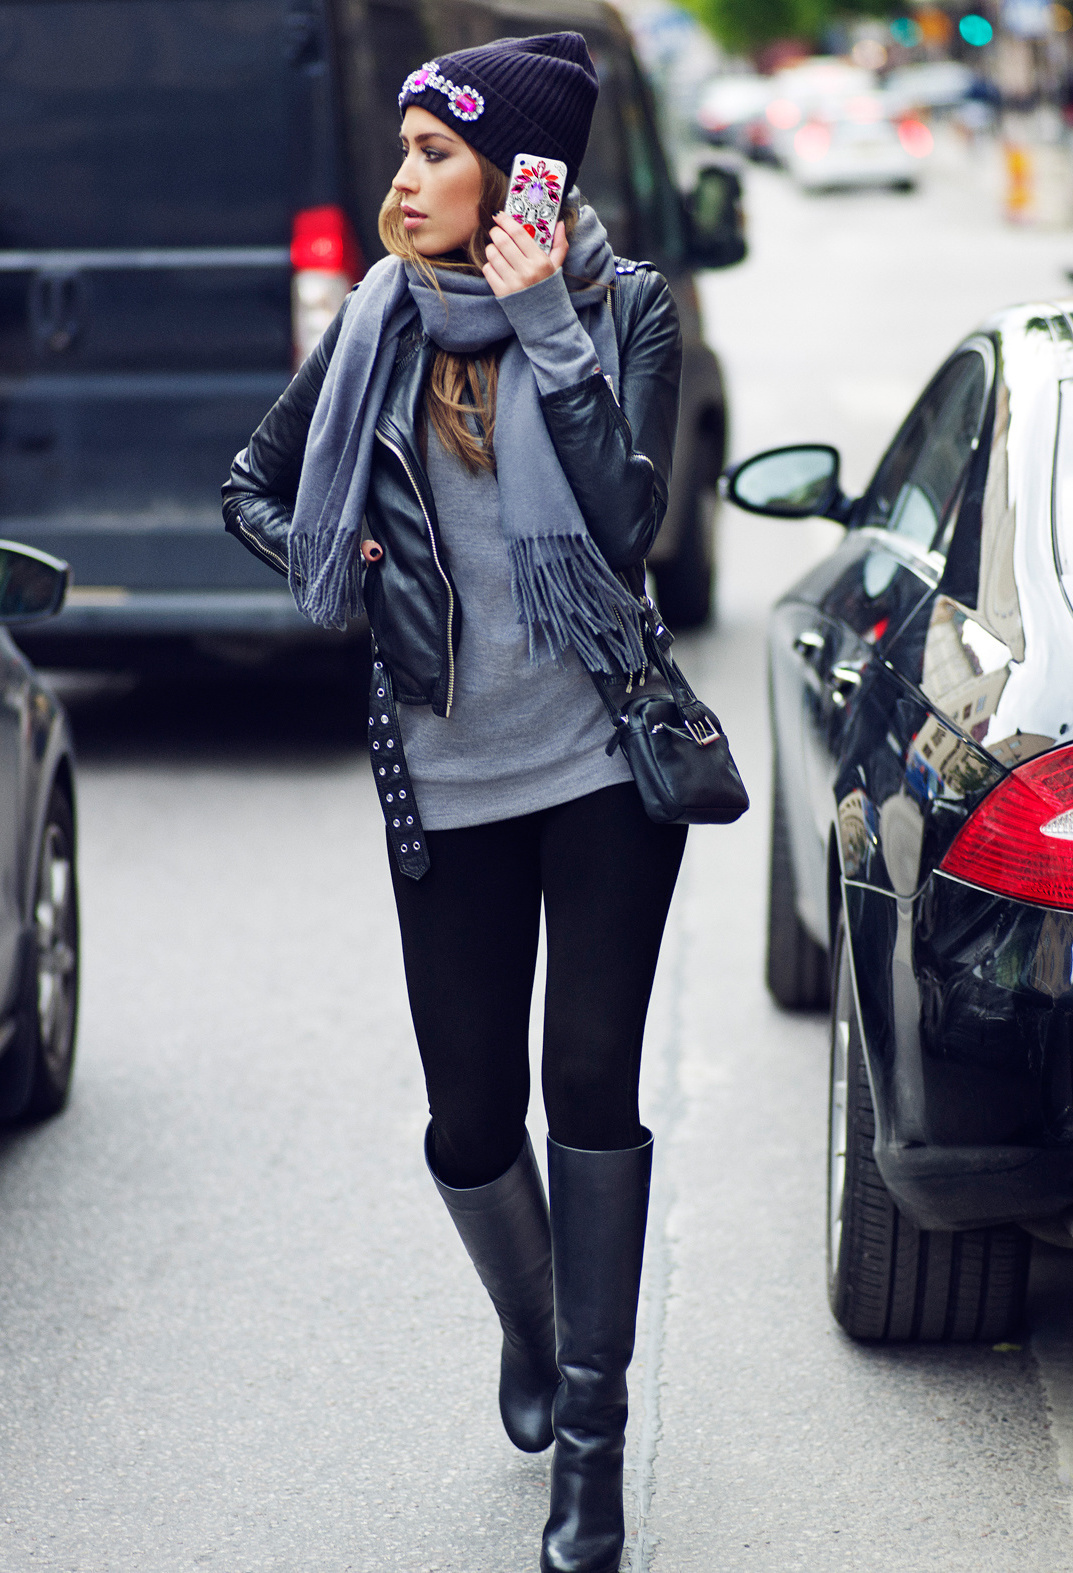 How To Wear Leggings And Not Look Like Youre Going To The Gym?